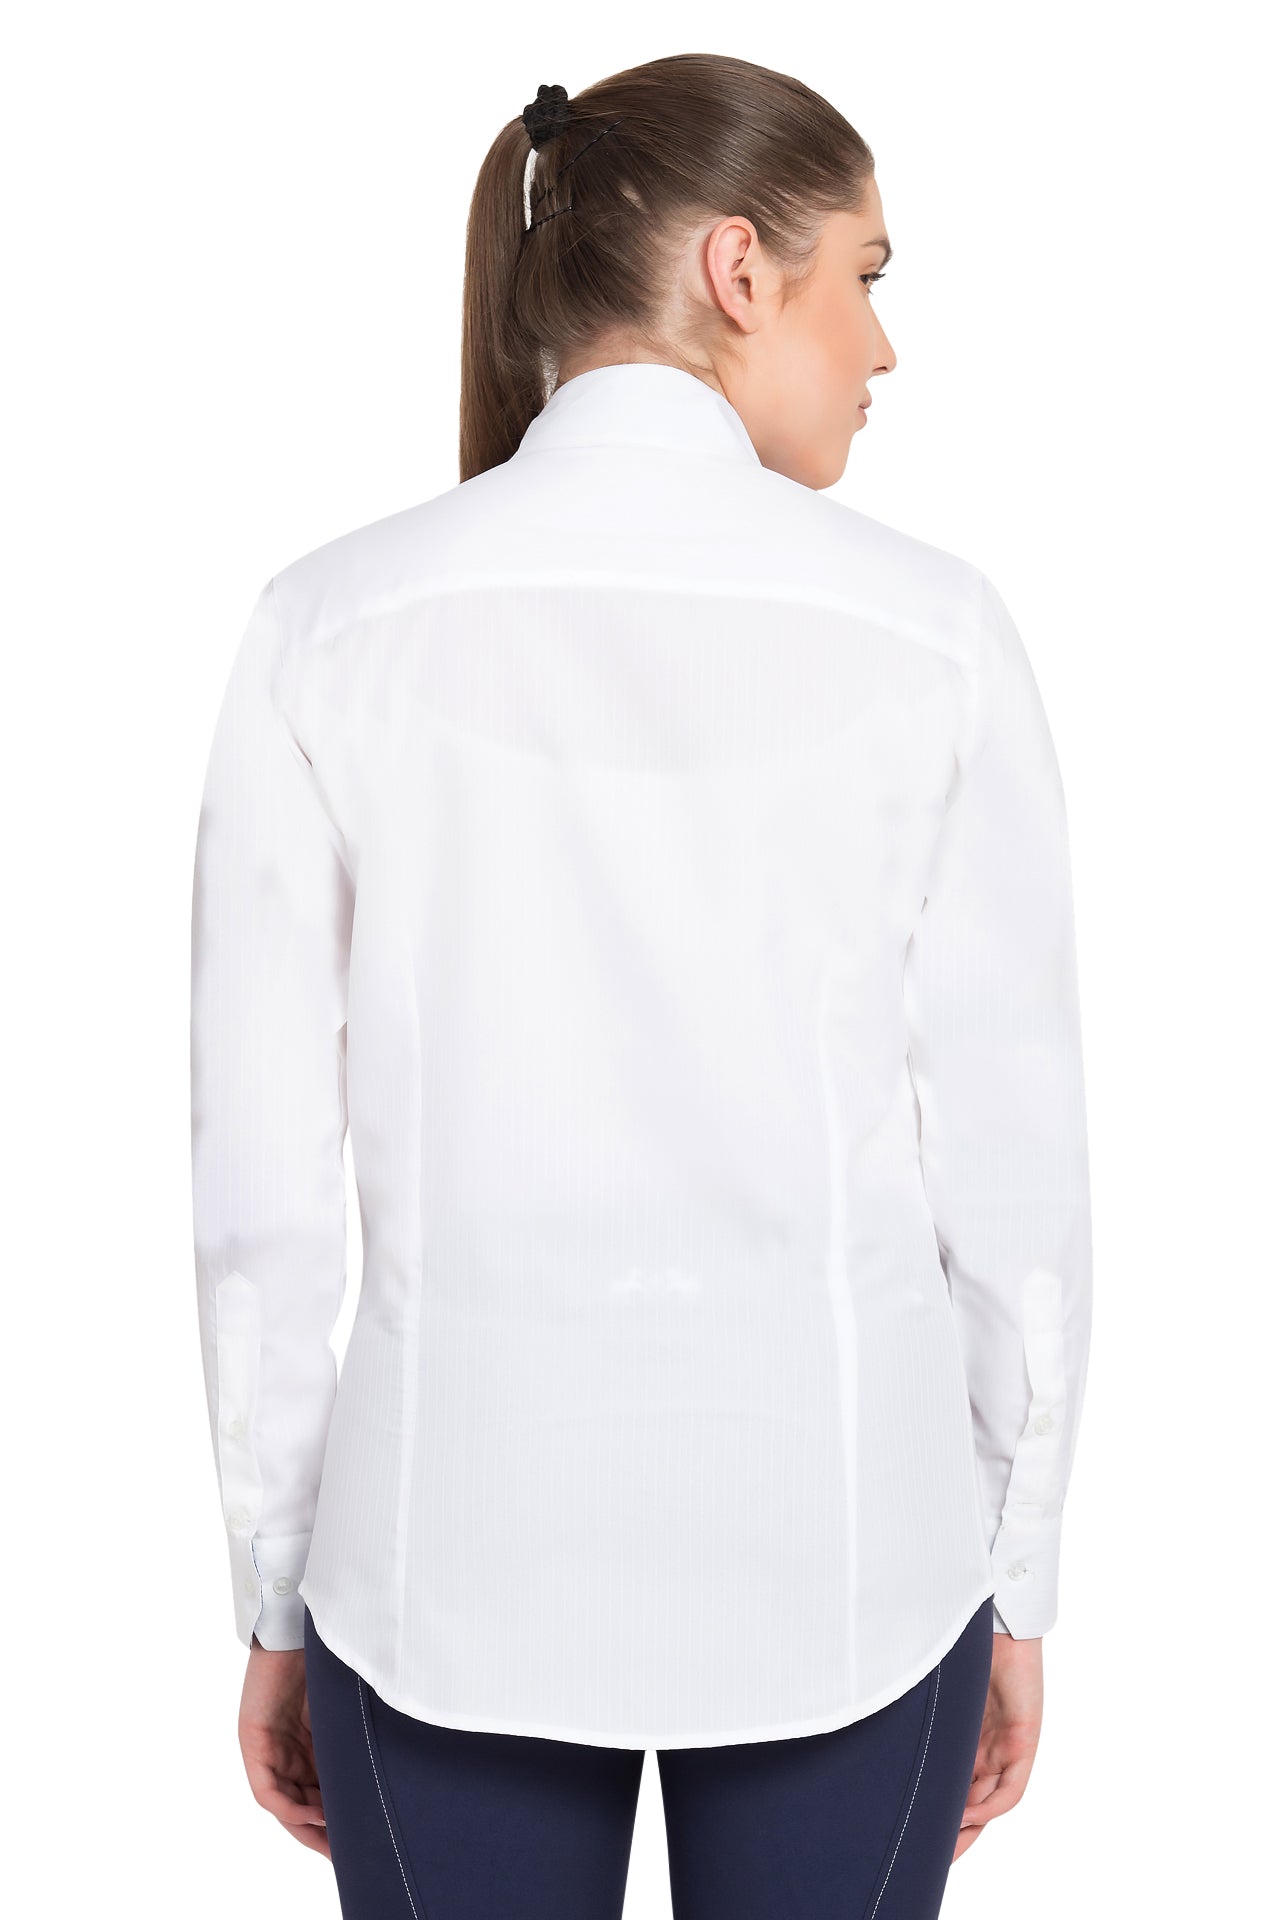 Equine Couture Ladies Isabel Coolmax Long Sleeve Show Shirt